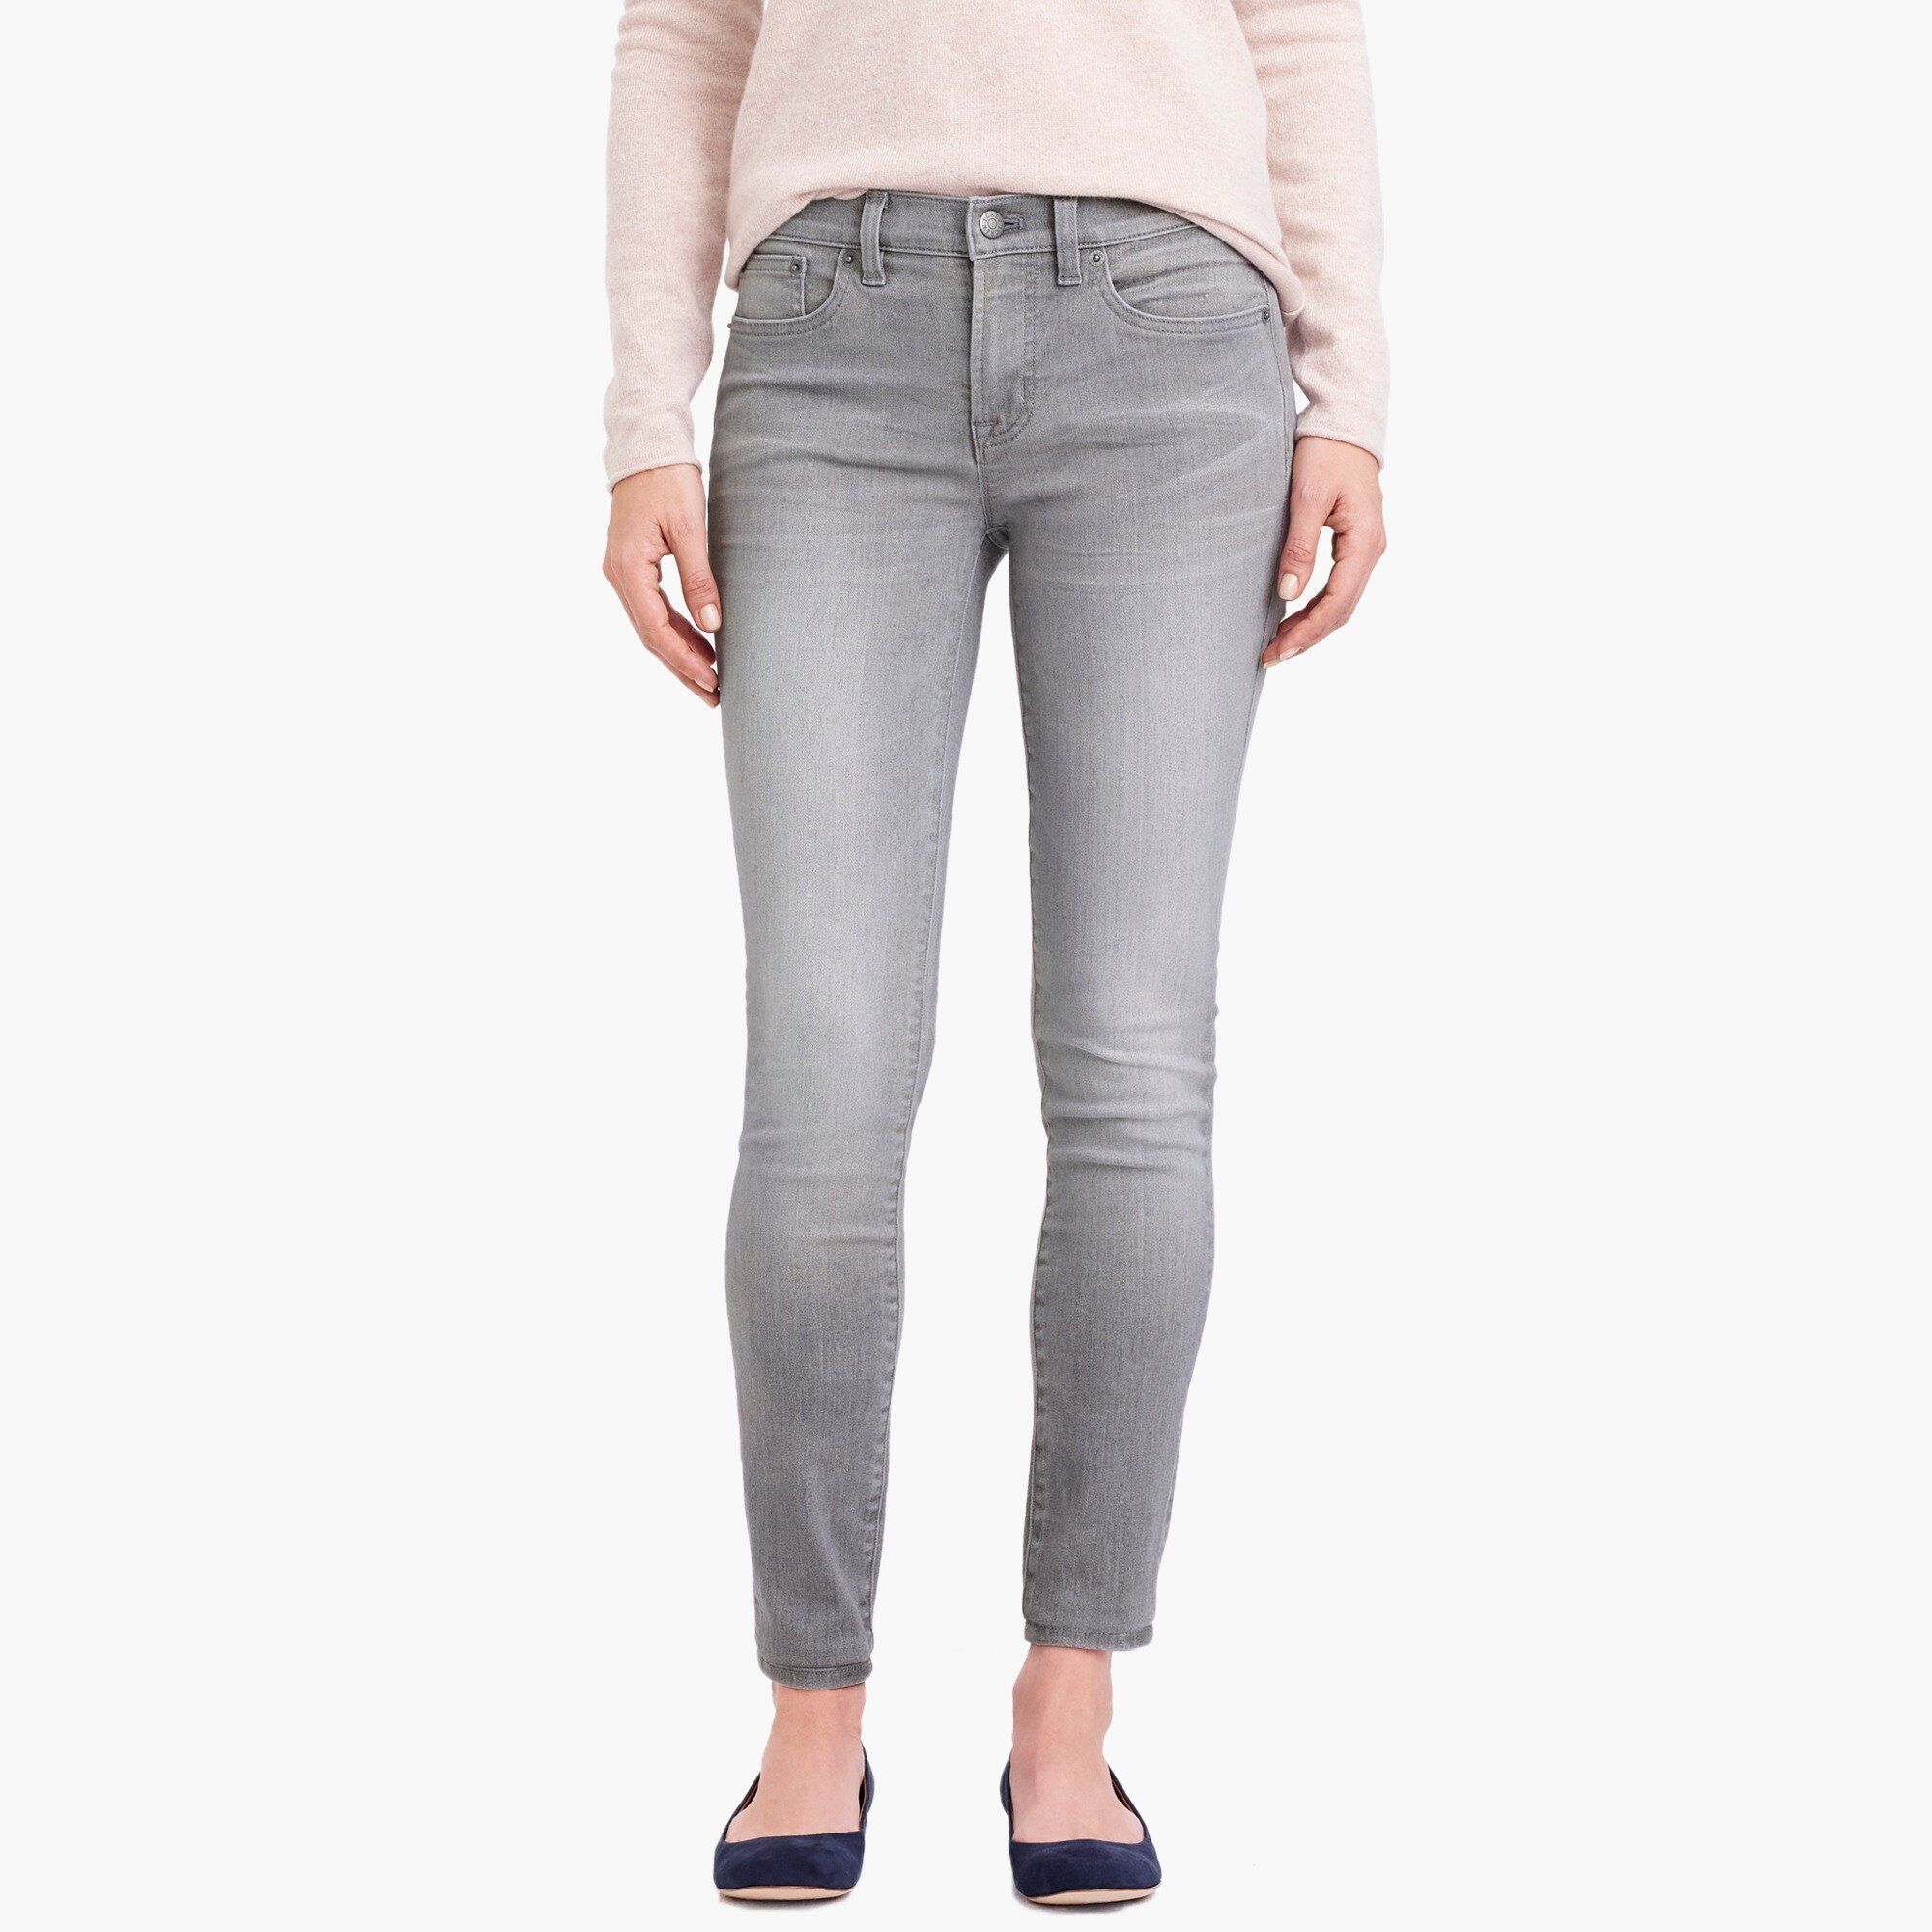 Valley wash skinny jean with 28" inseam | J.Crew Factory